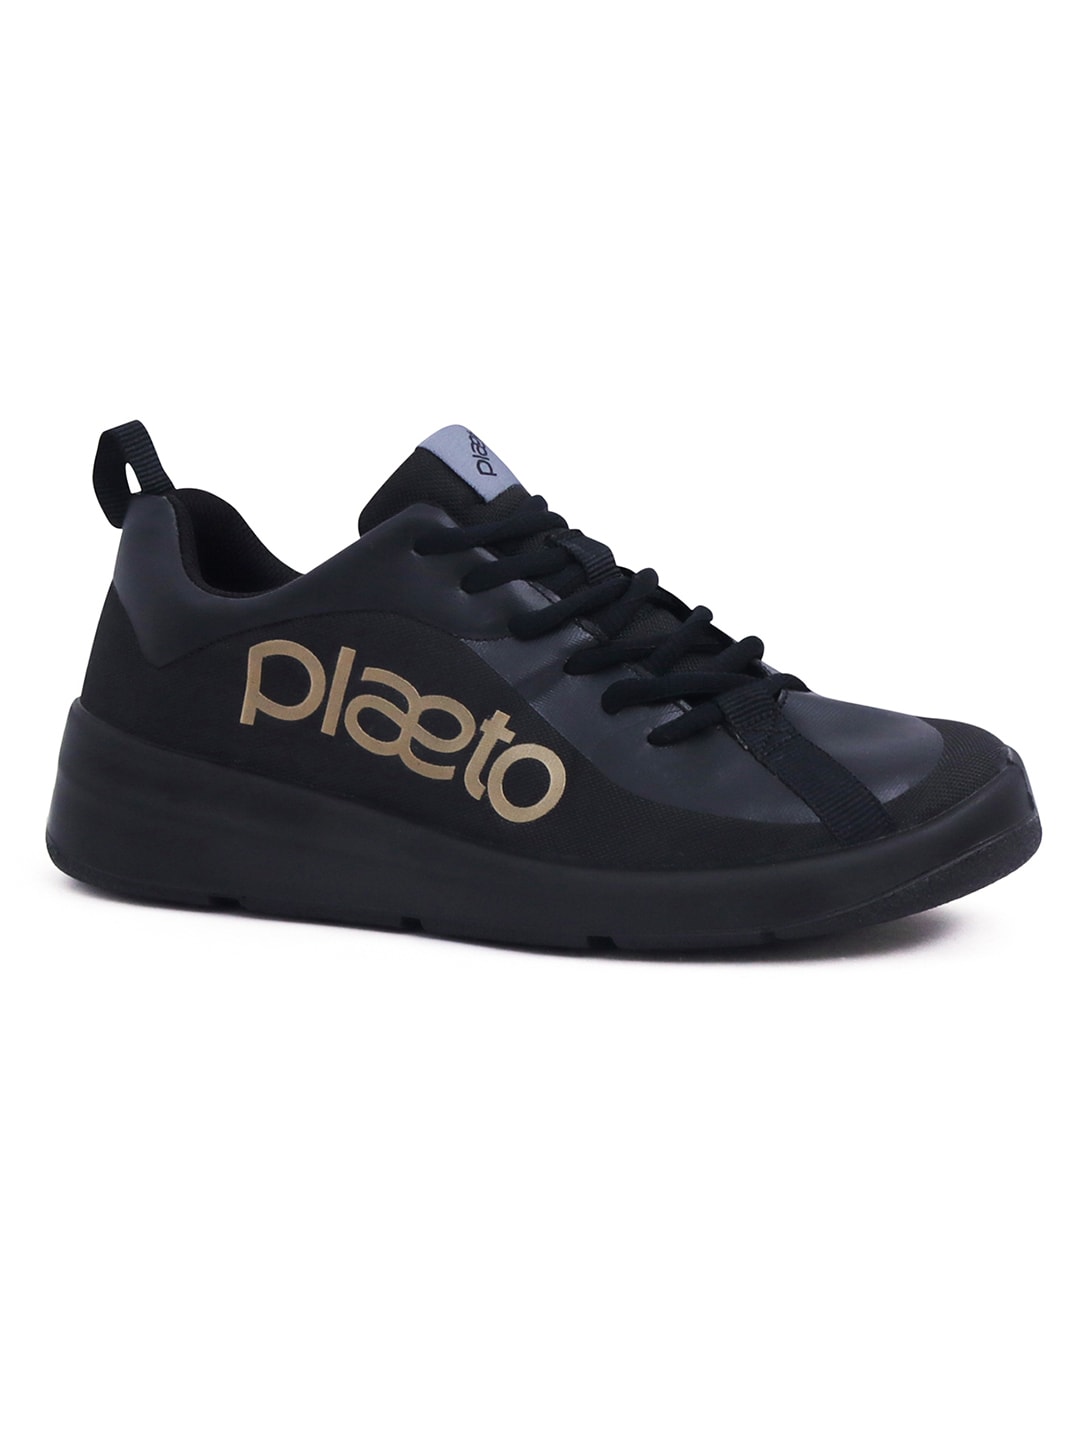 plaeto Unisex Drift Multiplay Sports Shoes Price in India